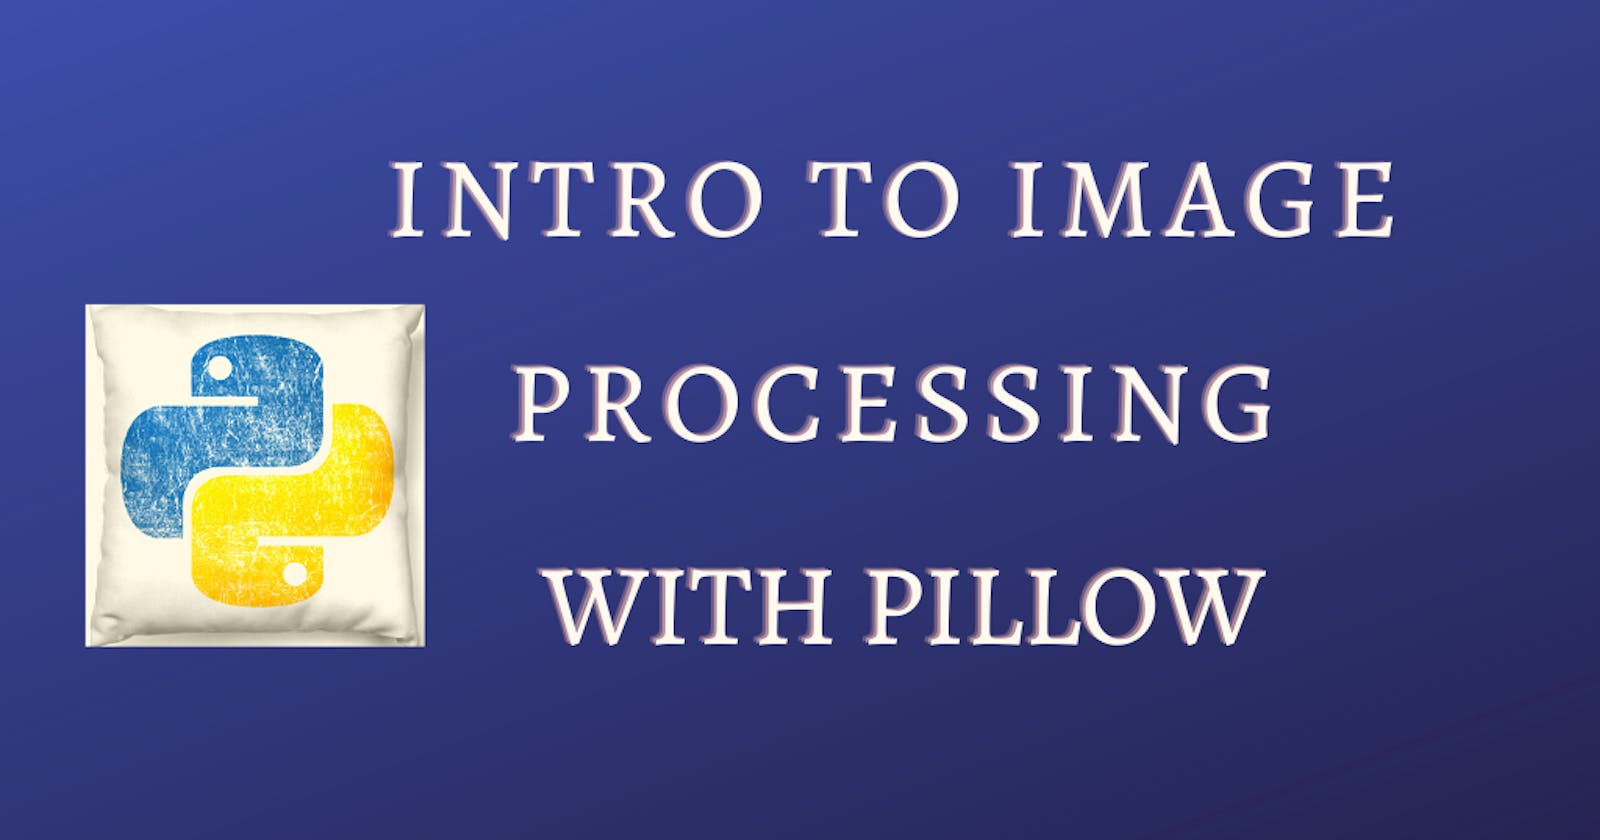 Intro to Image processing in Python with pillow